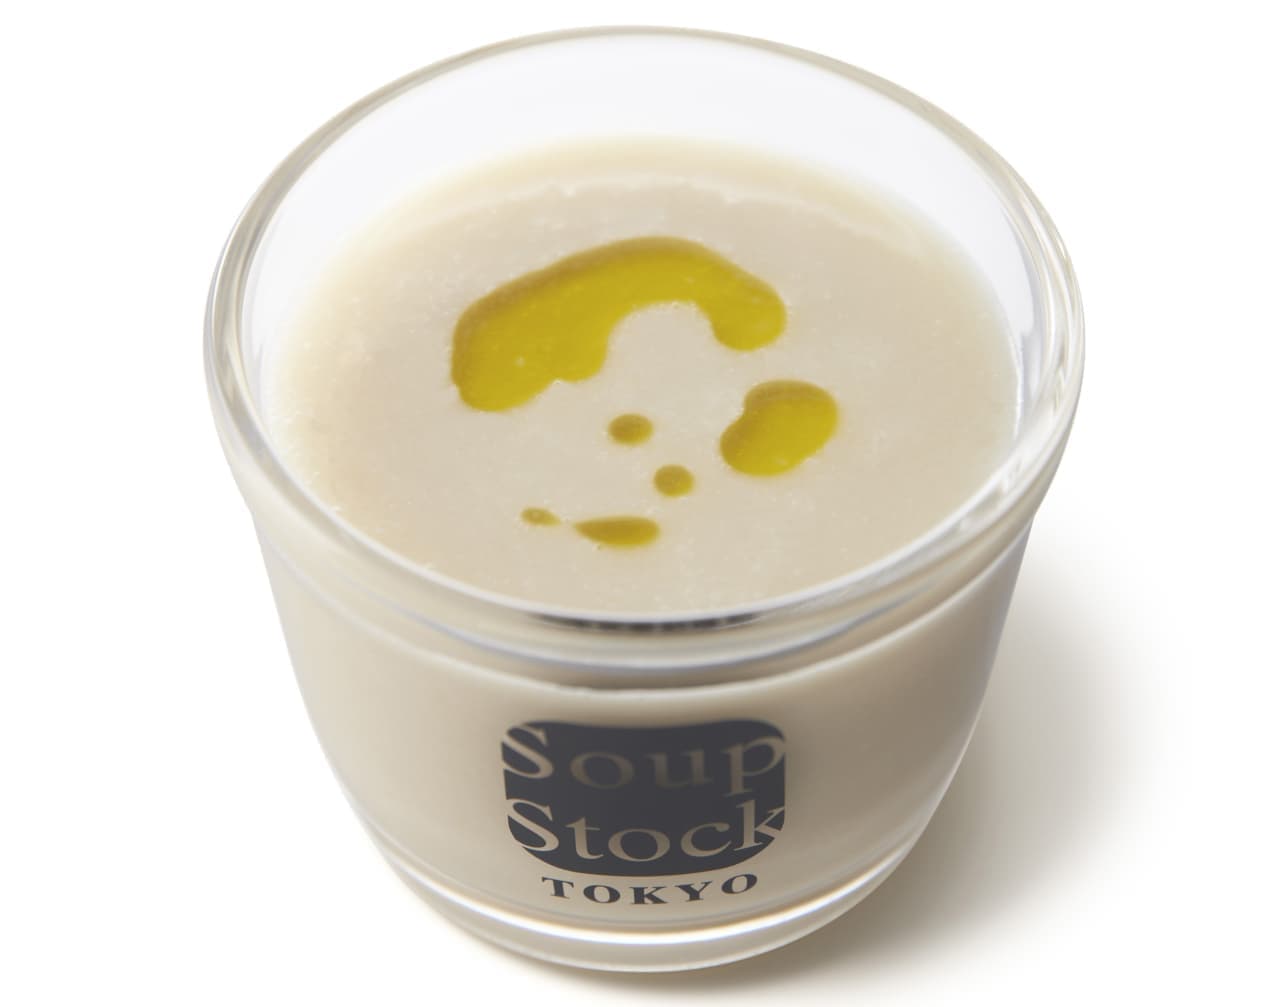 Soup Stock Tokyo "Cold Potage with Cauliflower